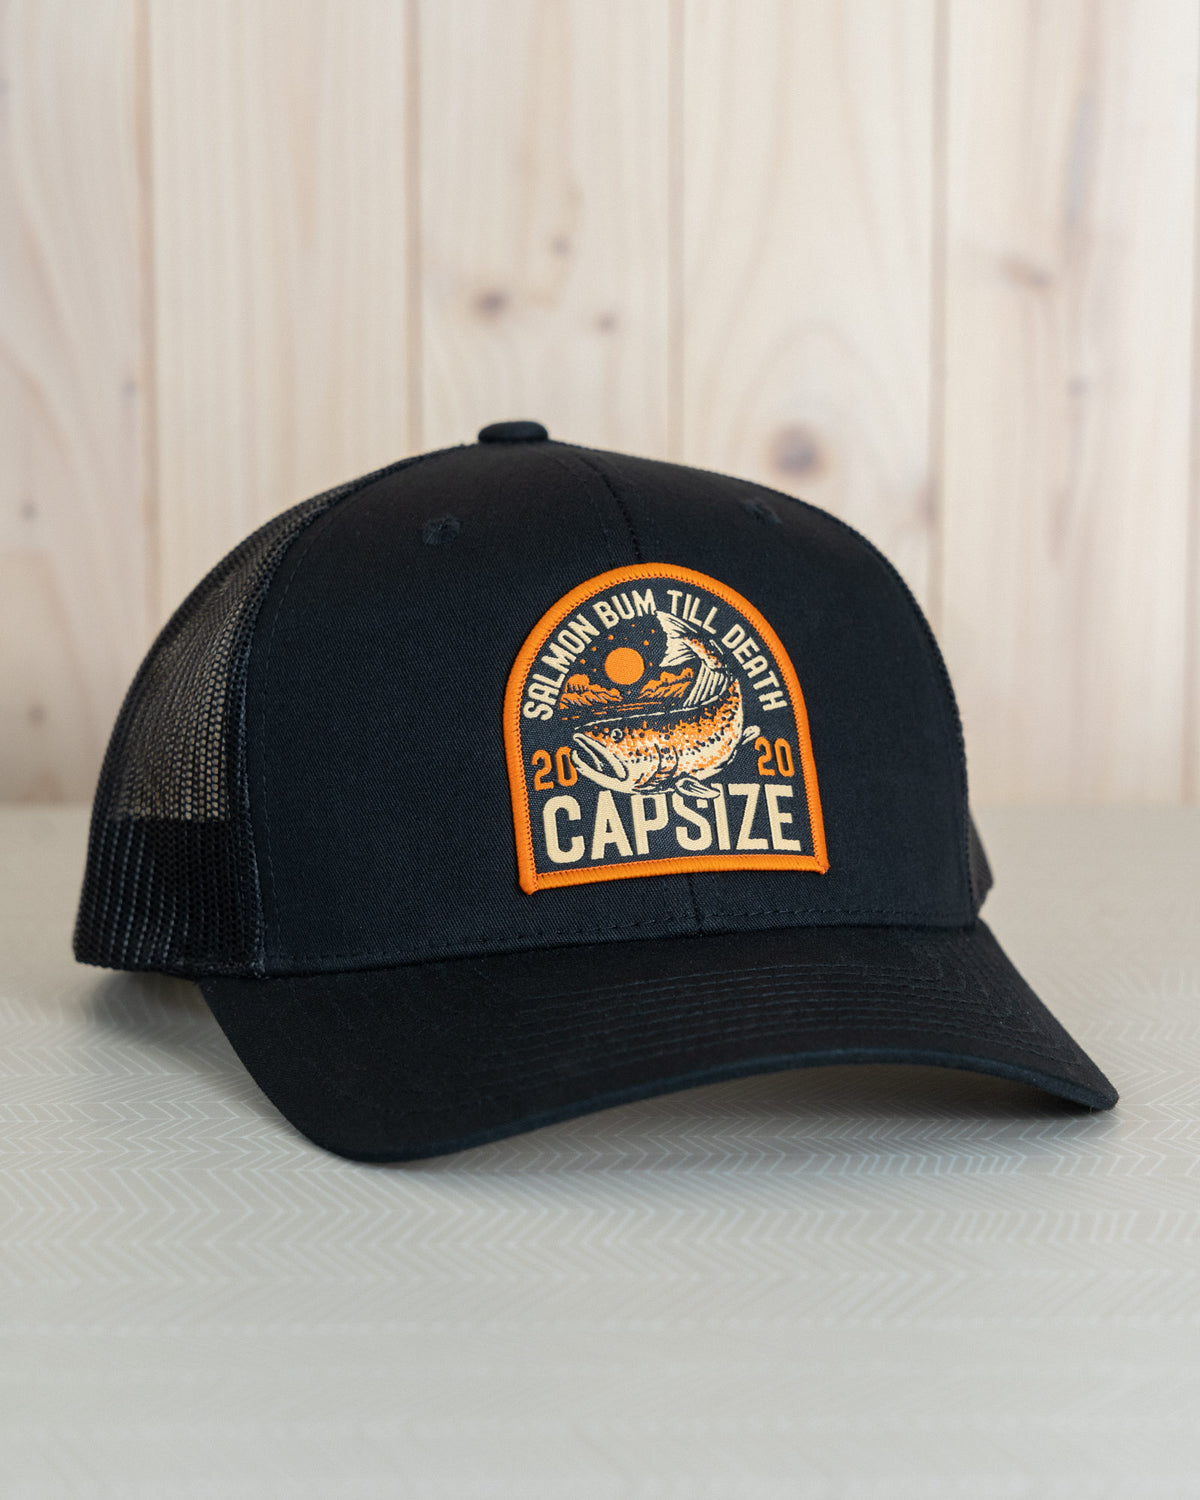 Fly Fishing Hats  Capsize Fly Fishing Tagged Salmon